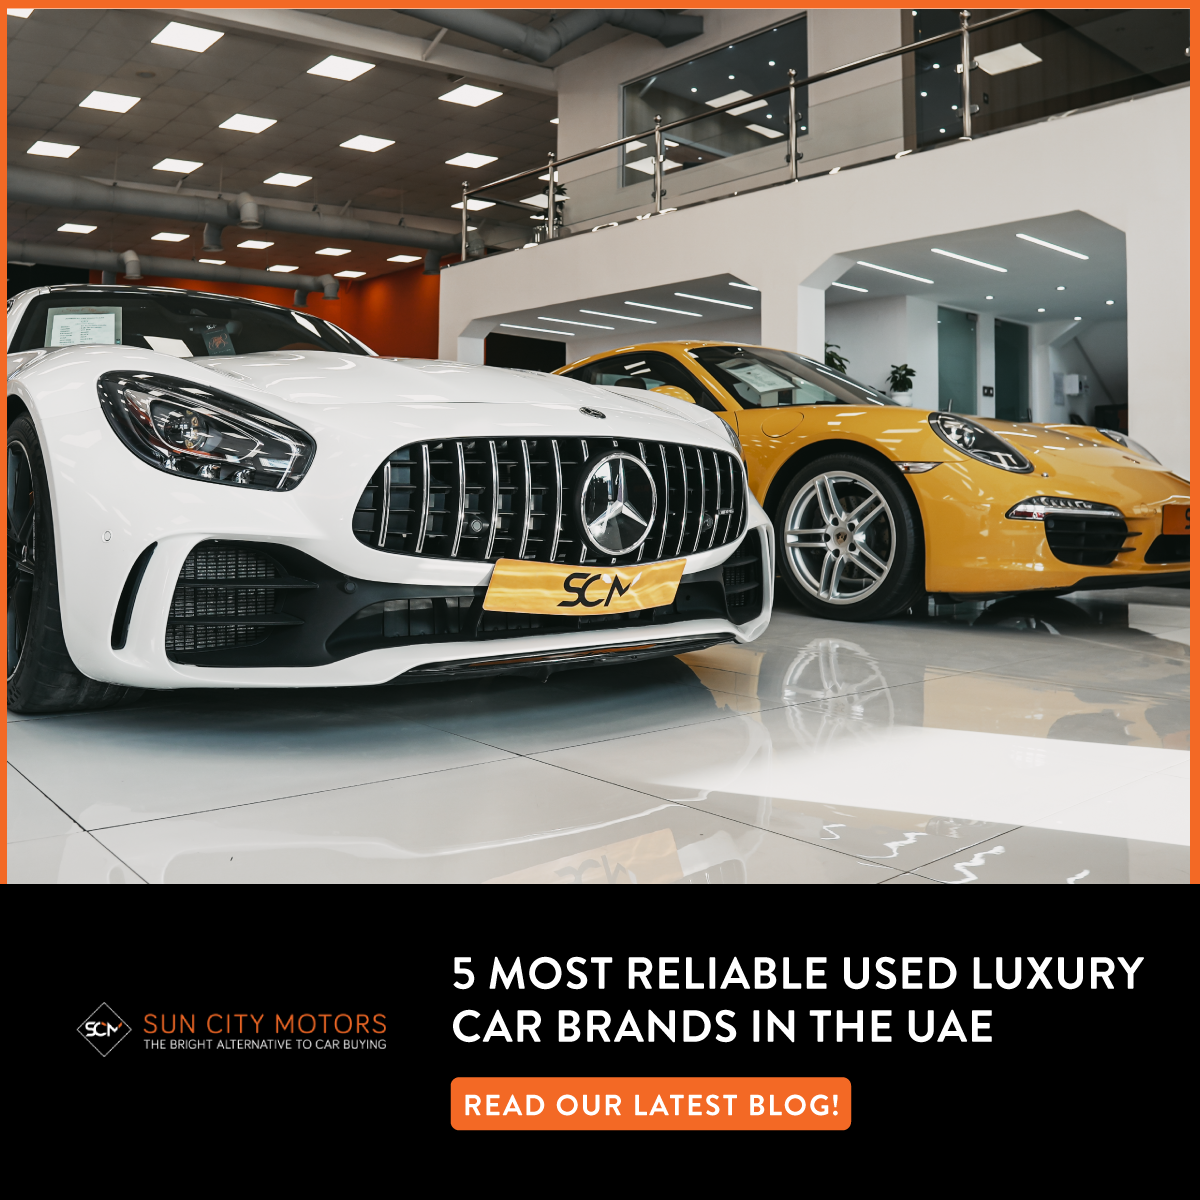 5 Most Reliable Used Luxury Car Brands In the UAE